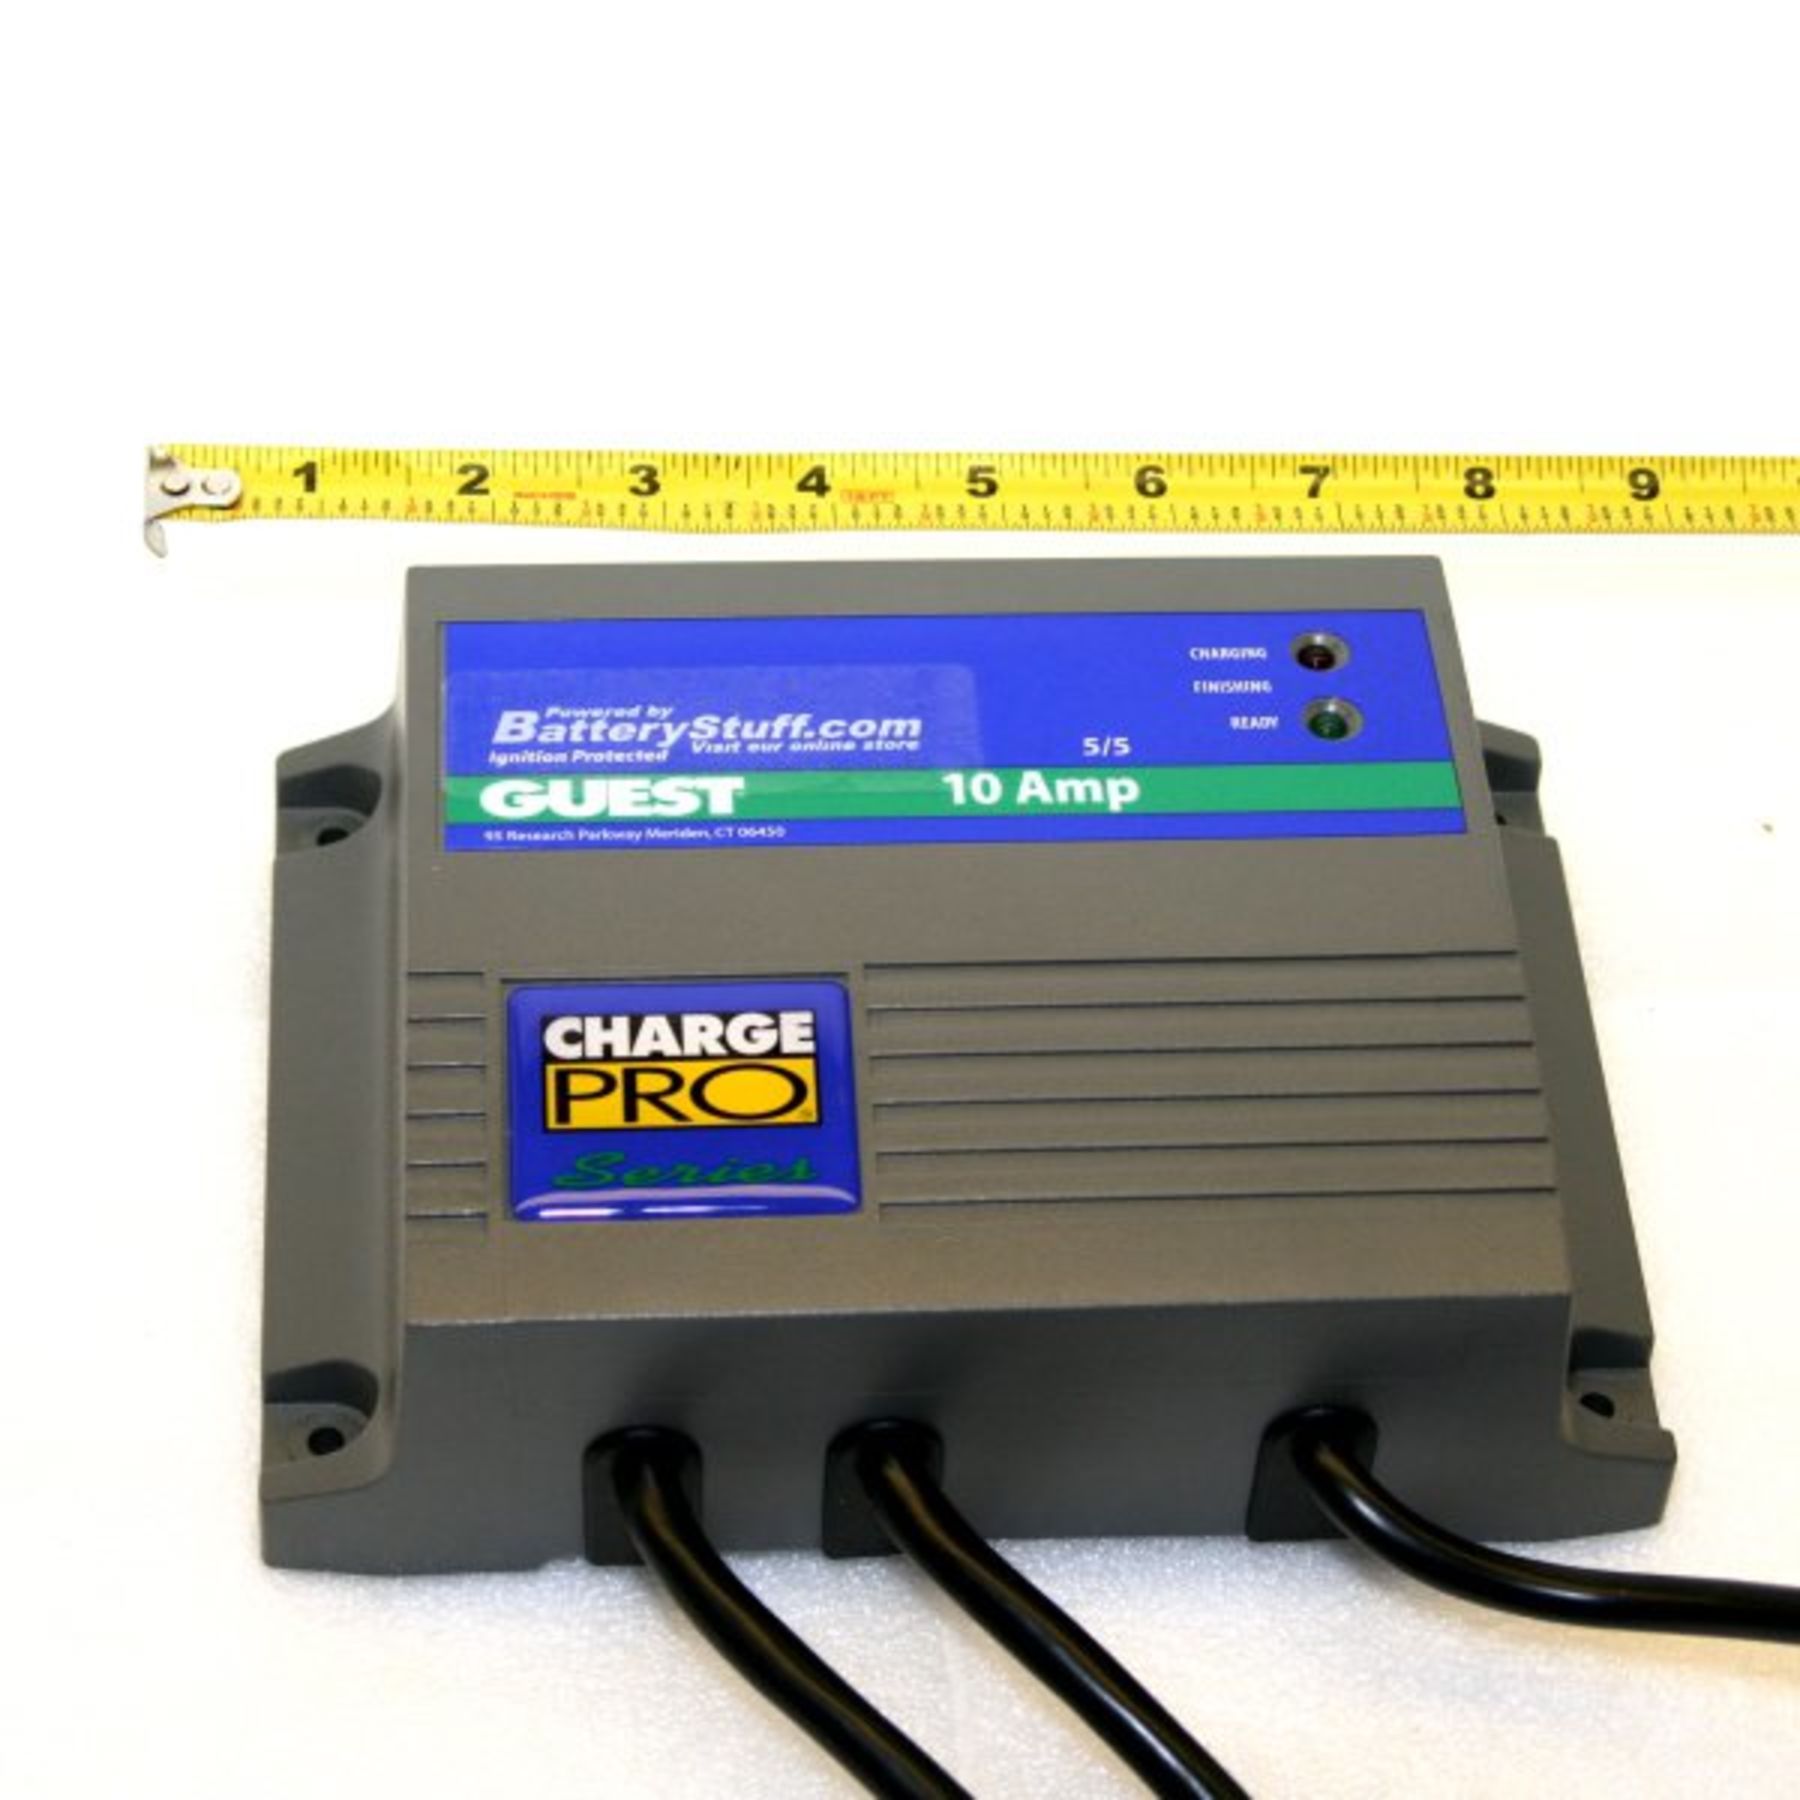 Guest 8 amp battery charger manual